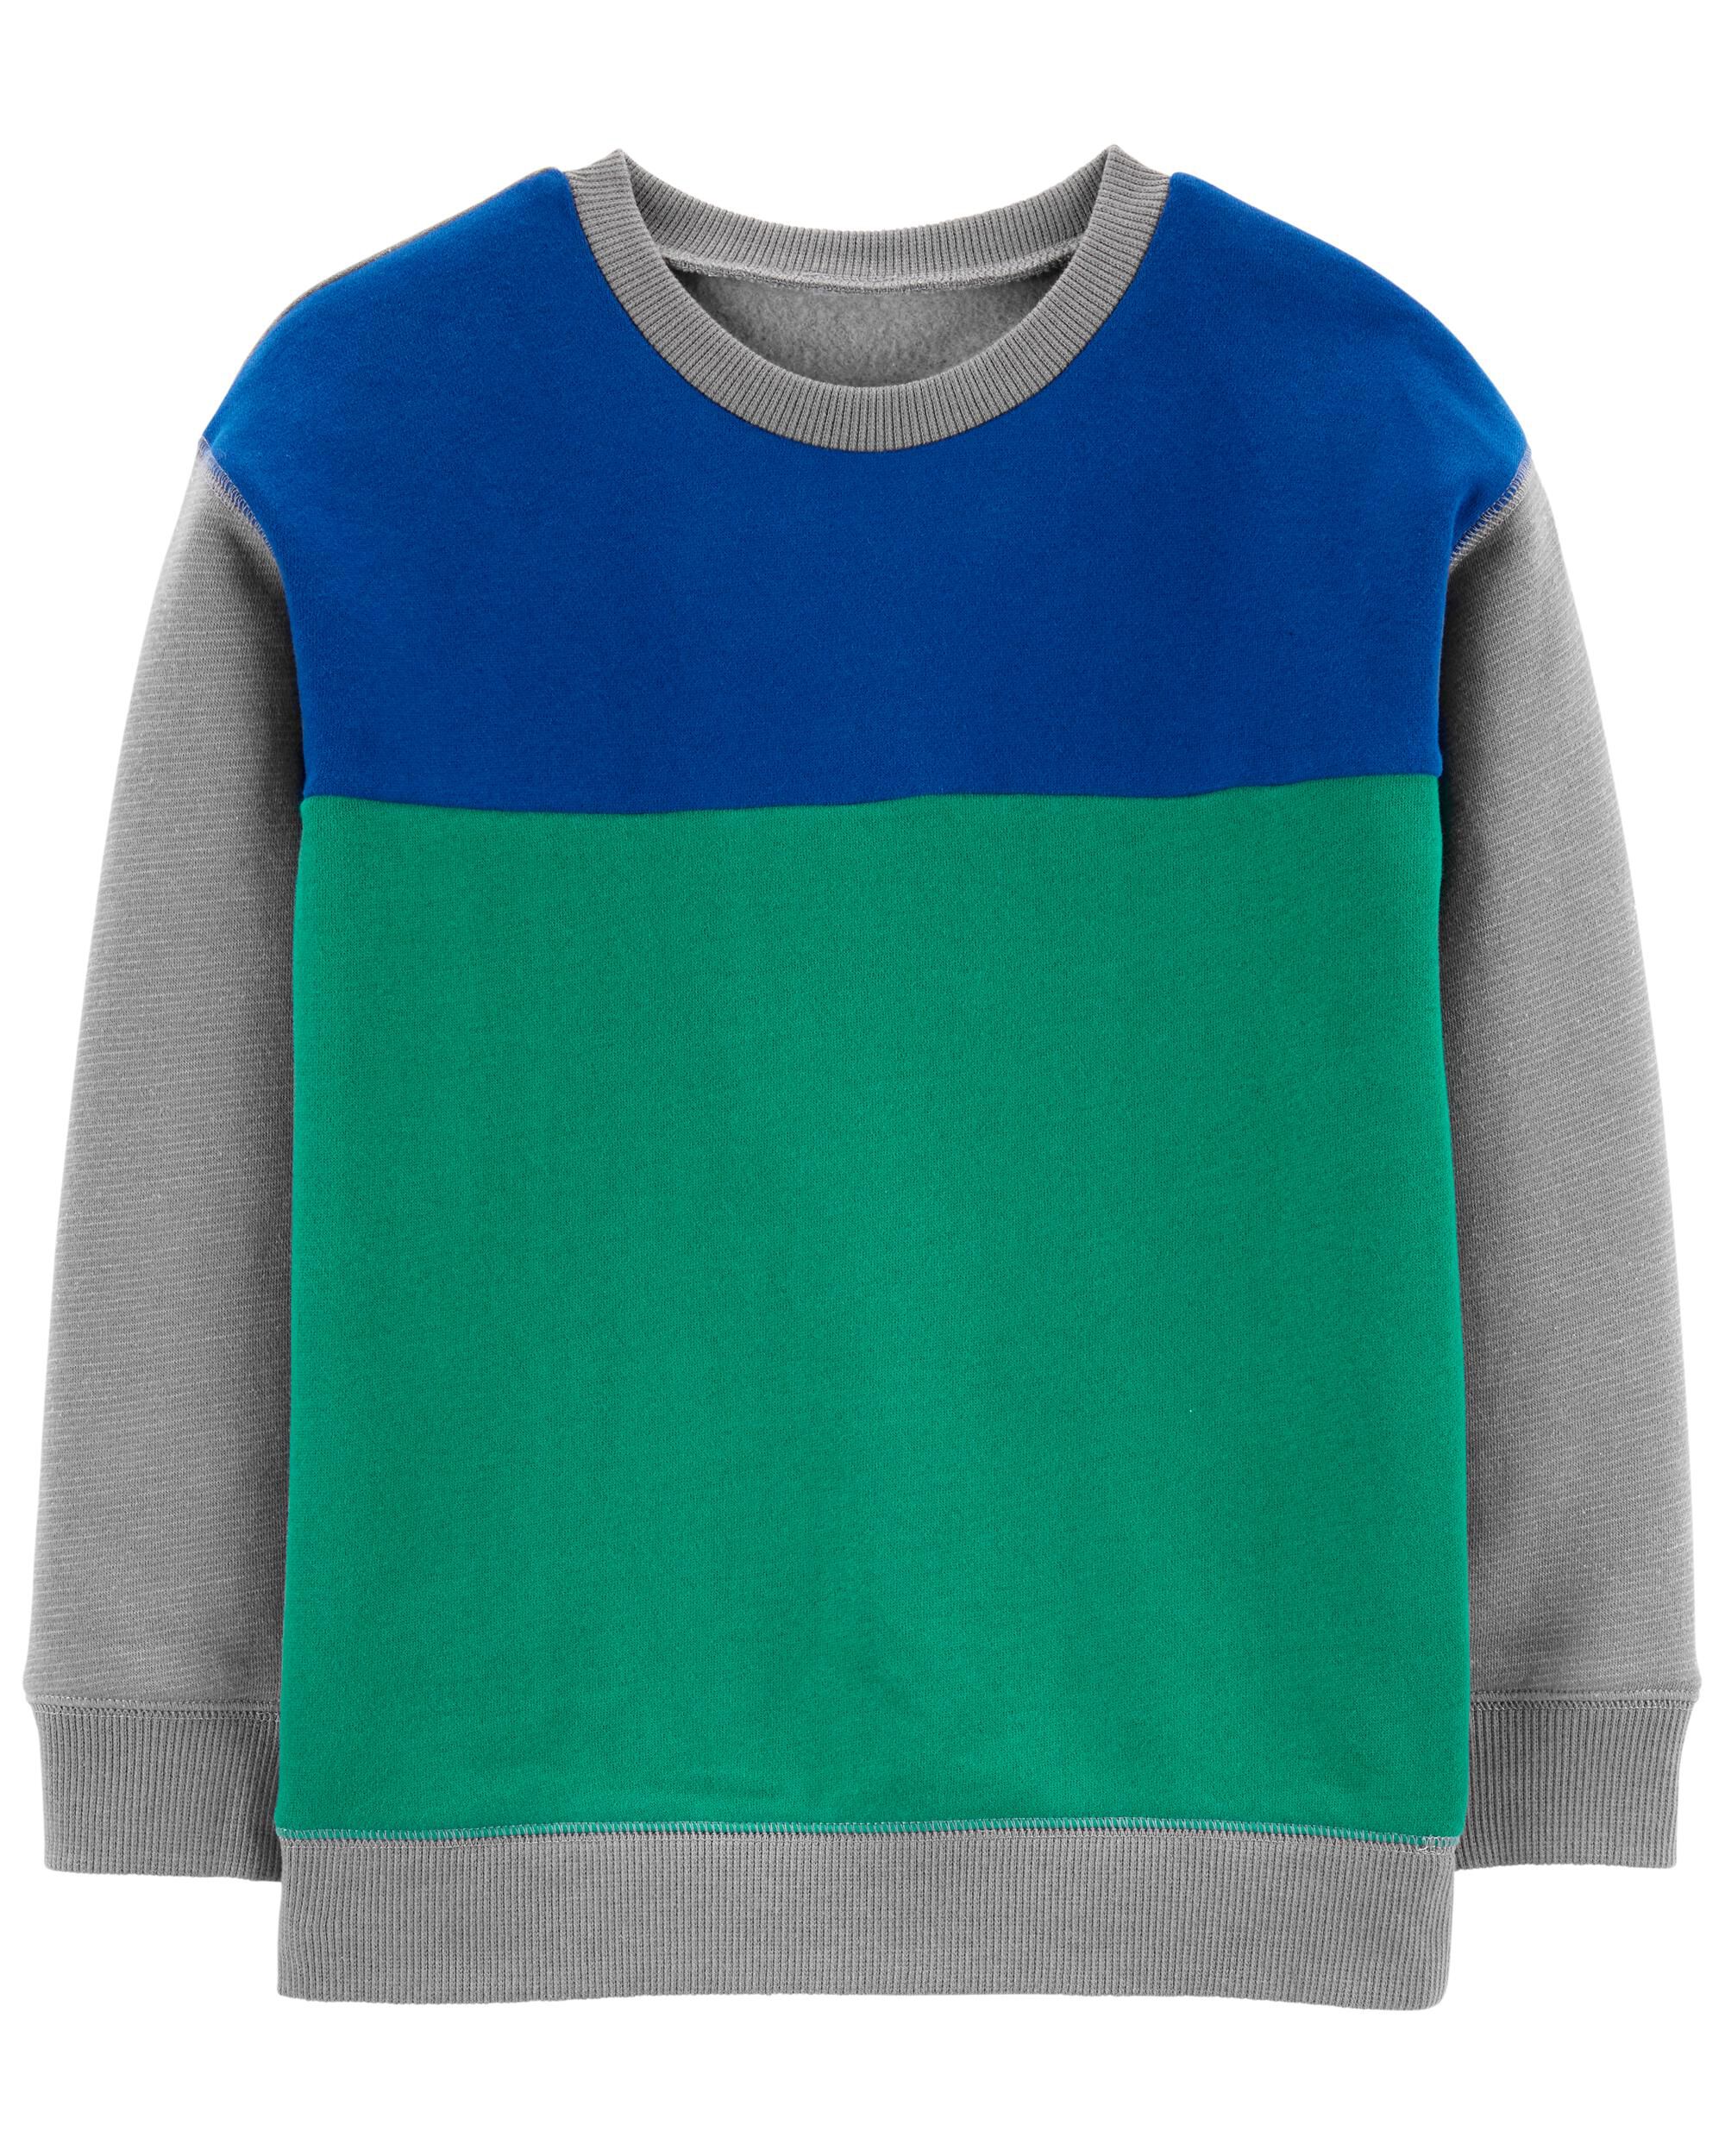  *CLEARANCE* Colorblock Cotton Sweater 